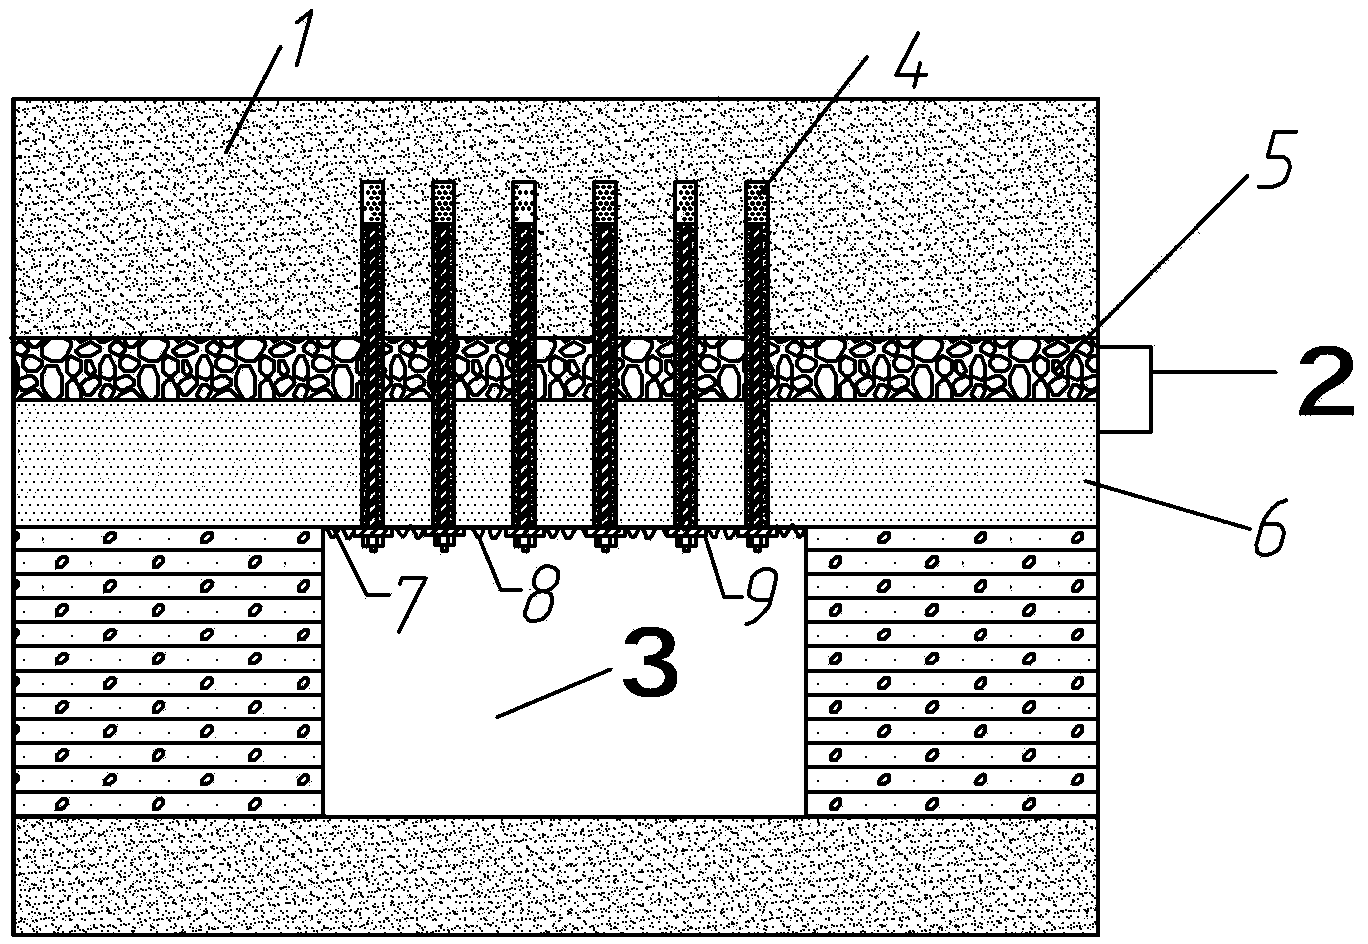 Support method for bolt-grouting composite crushing dynamic-pressure roadway soft rock roof by high-pre-stressed anchor cable